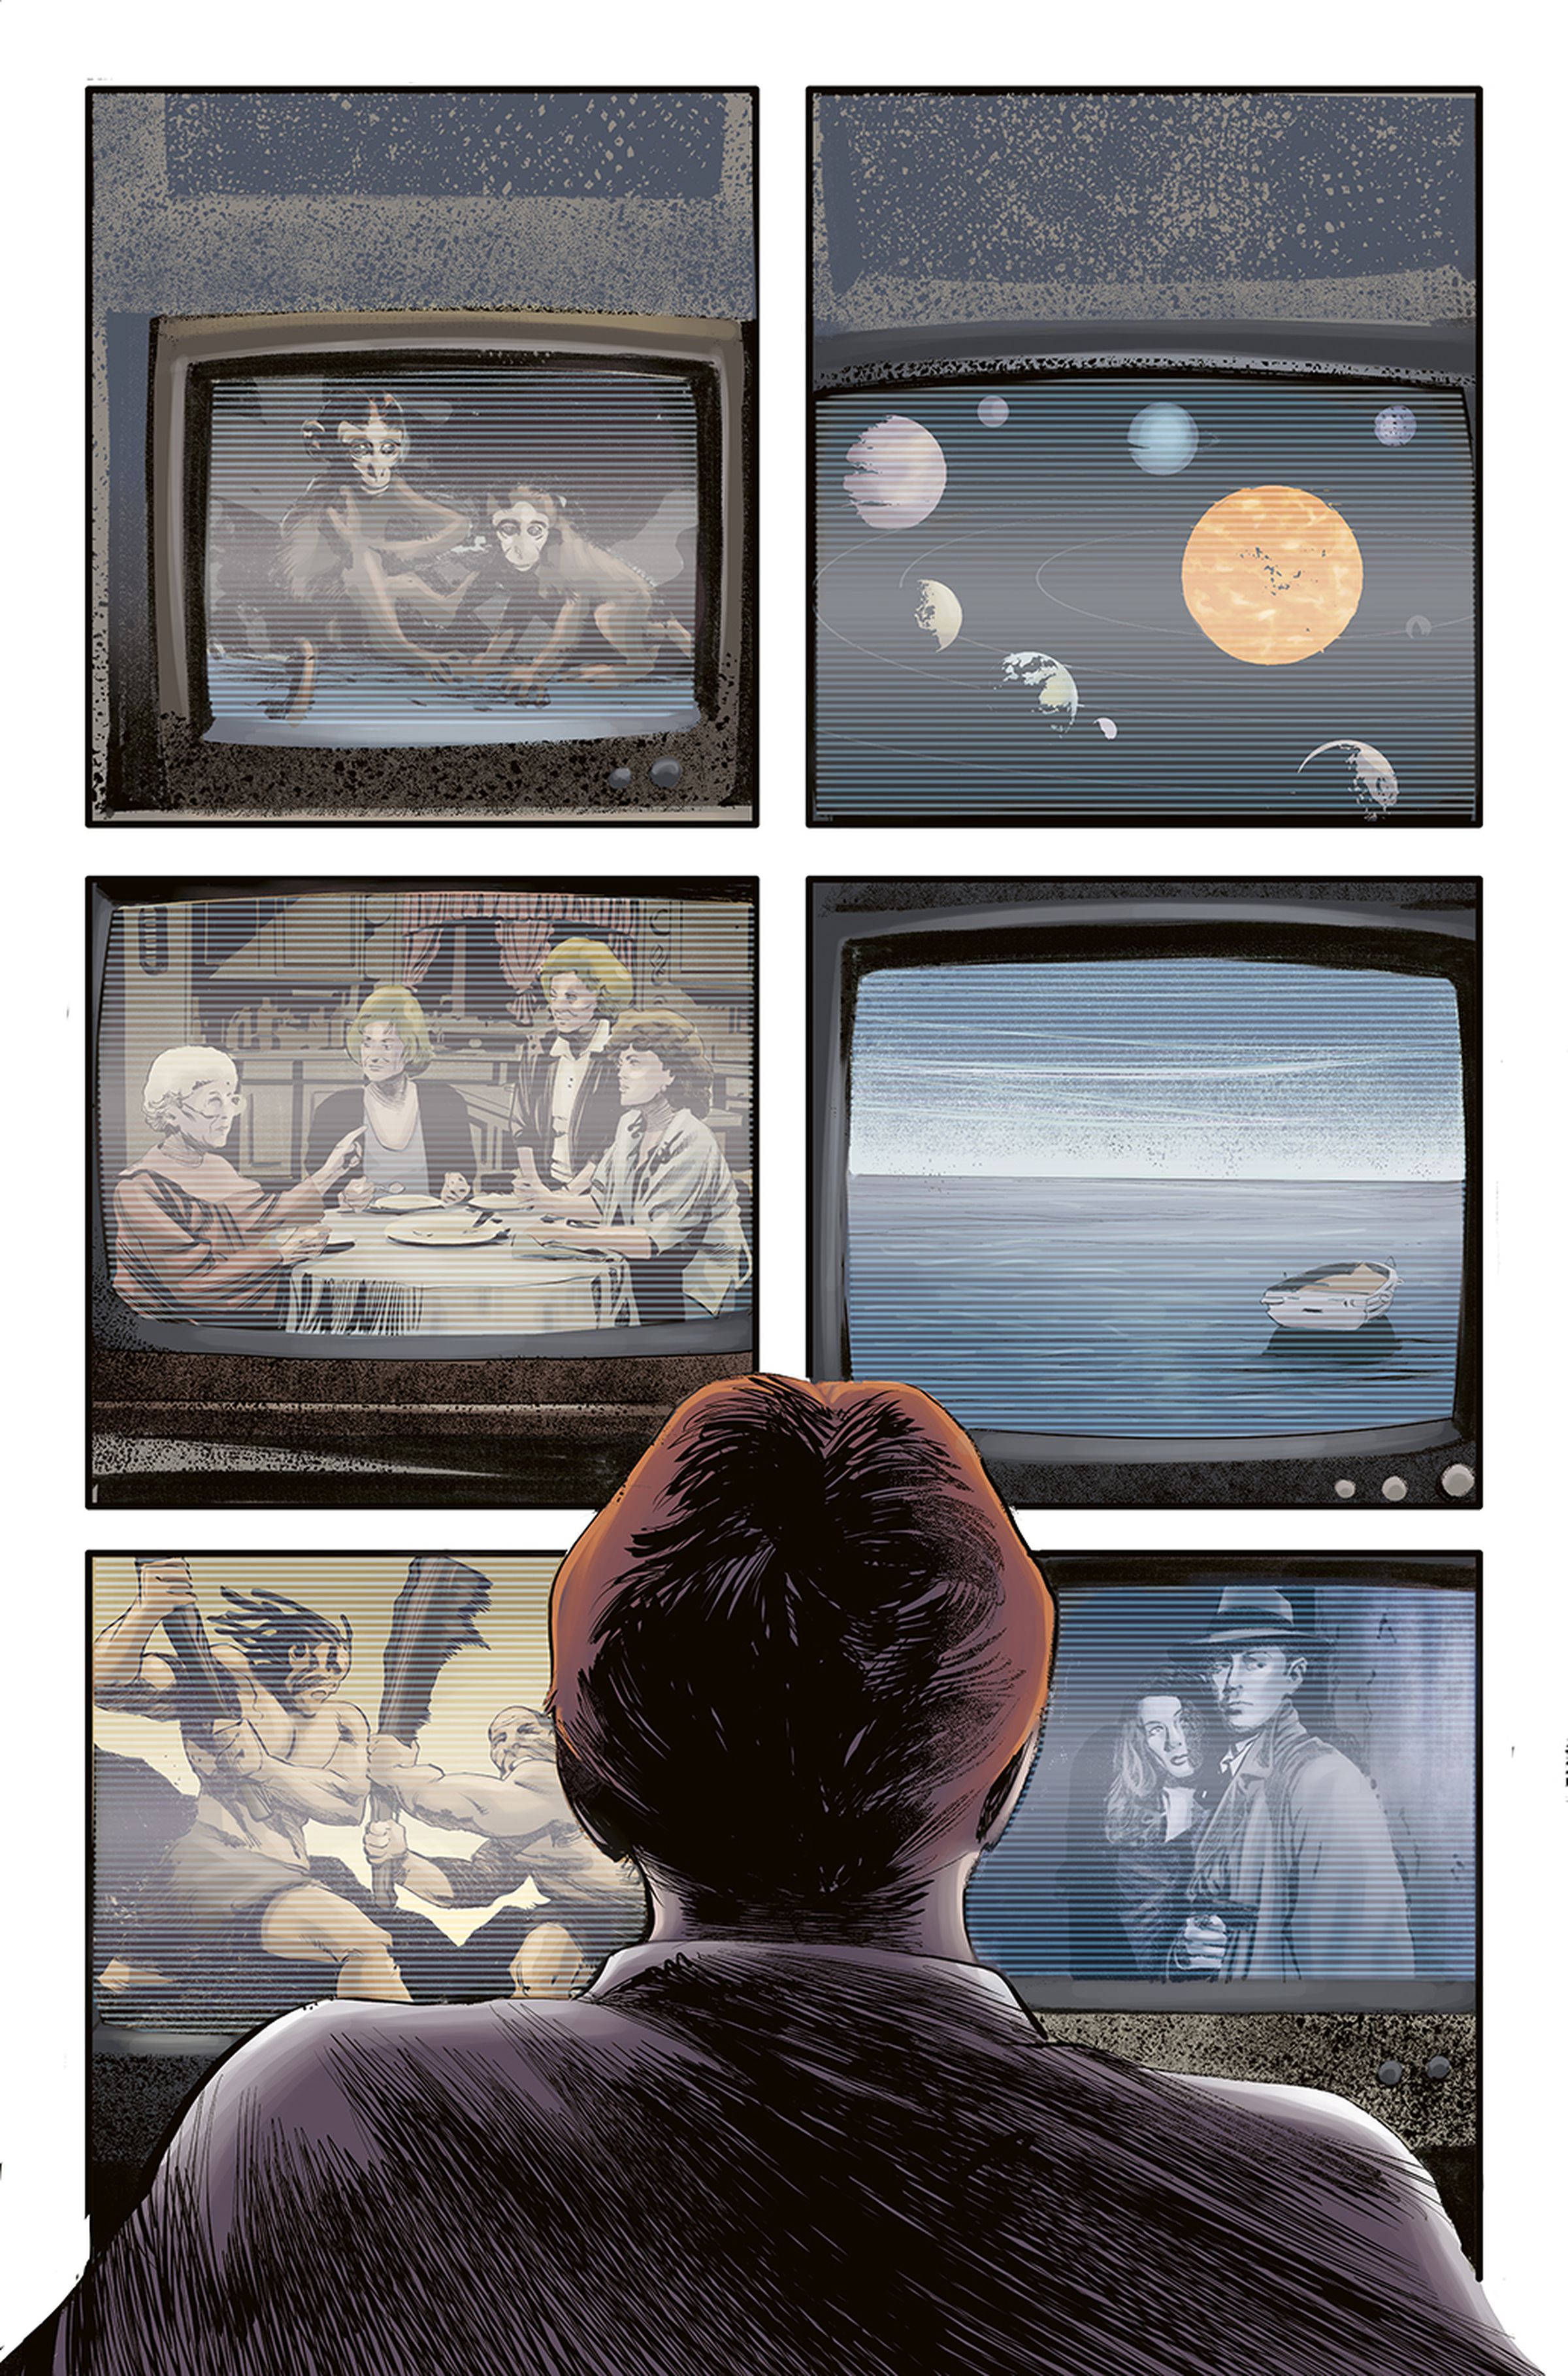 Interior art from Titan Comics’ graphic novelization of The Man Who Fell to Earth.